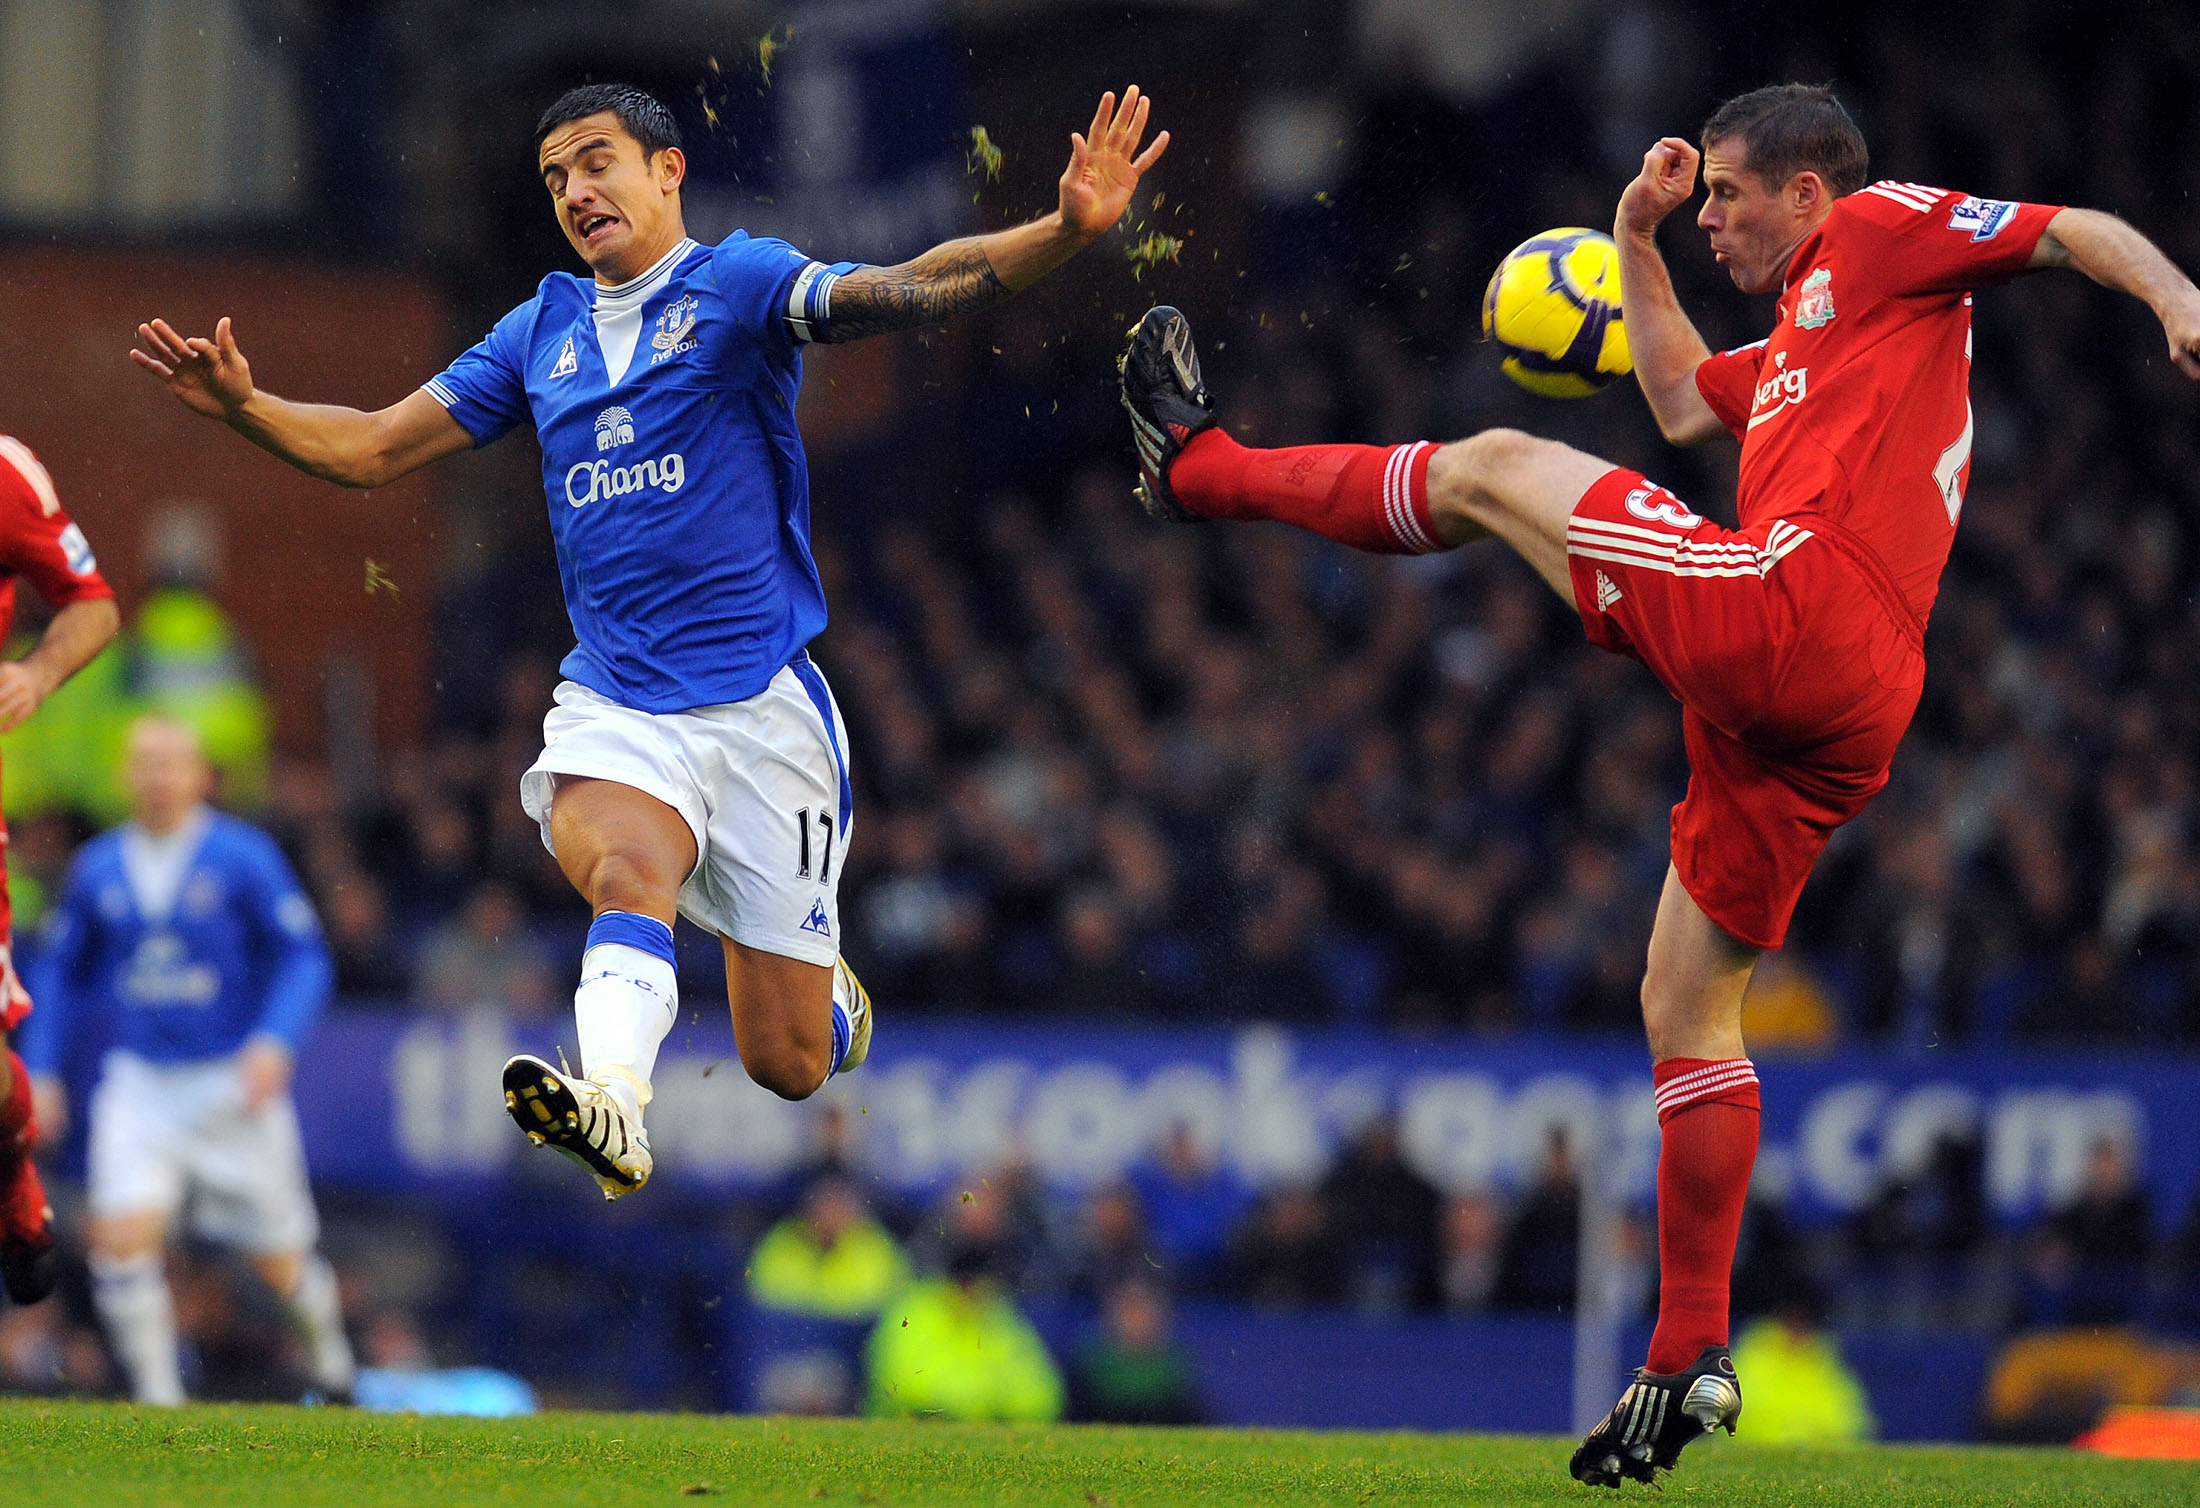 Everton's Australian midfielder Tim Cahill (L) challenges Liverpool's English defender Jamie Carragher during the English Premier League football match at Goodison Park in Liverpool, north-west England on November 29, 2009. AFP PHOTO/ANDREW YATES --- RESTRICTED TO EDITORIAL USE Additional licence required for any commercial/promotional use or use on TV or internet (except identical online version of newspaper) of Premier League/Football League photos. Tel DataCo +44 207 2981656. Do not alter/modify photo (Photo credit should read -/AFP/Getty Images)